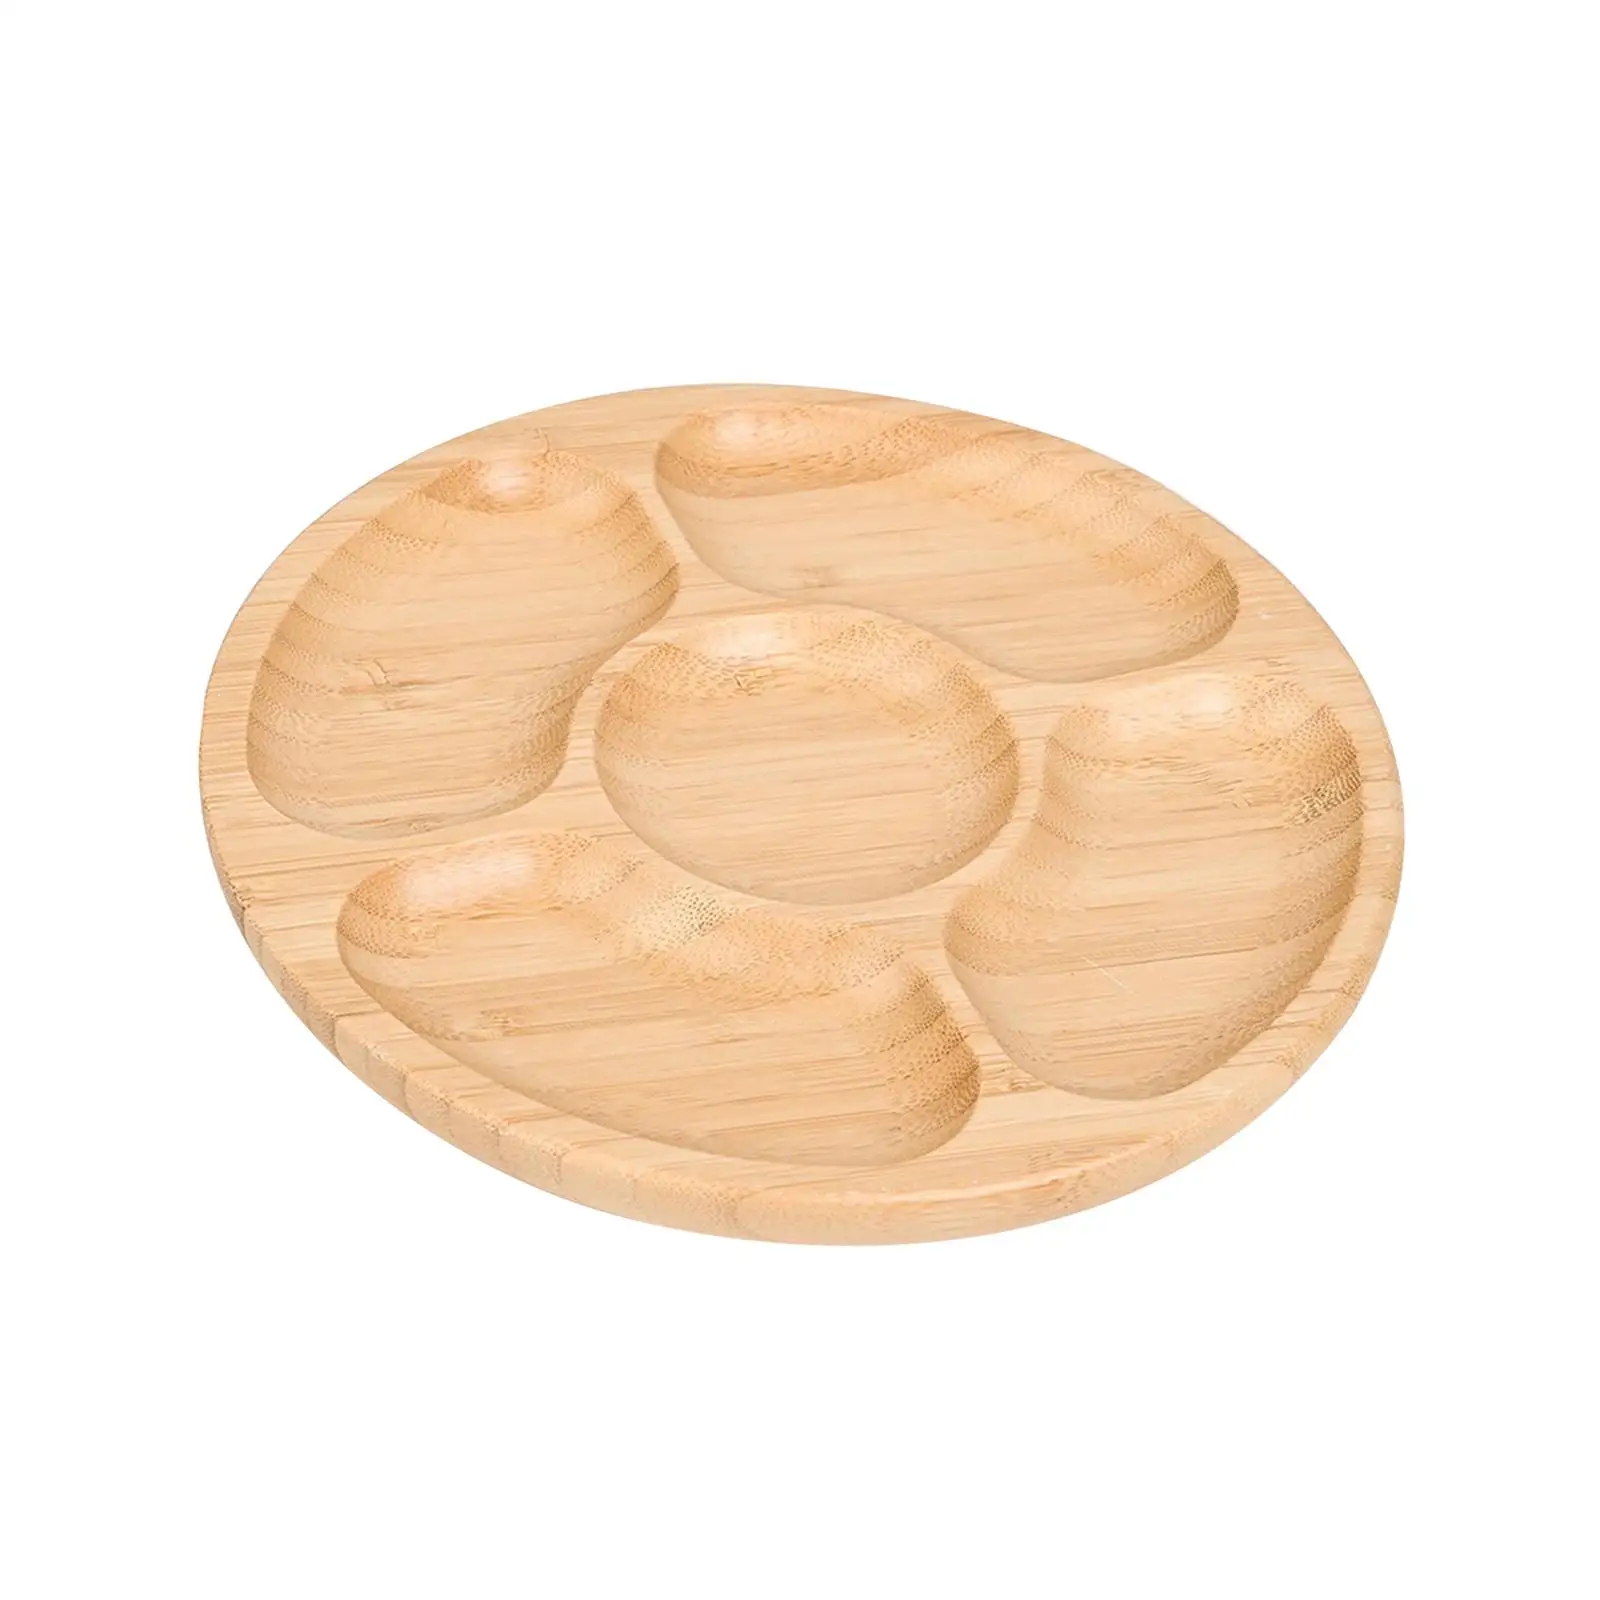 Wooden Tray Wooden Tea Trays Decor Wood Serving Platter Dessert Trays Fruit Plate for Vegetable Appetizer Candies Pastry Bread